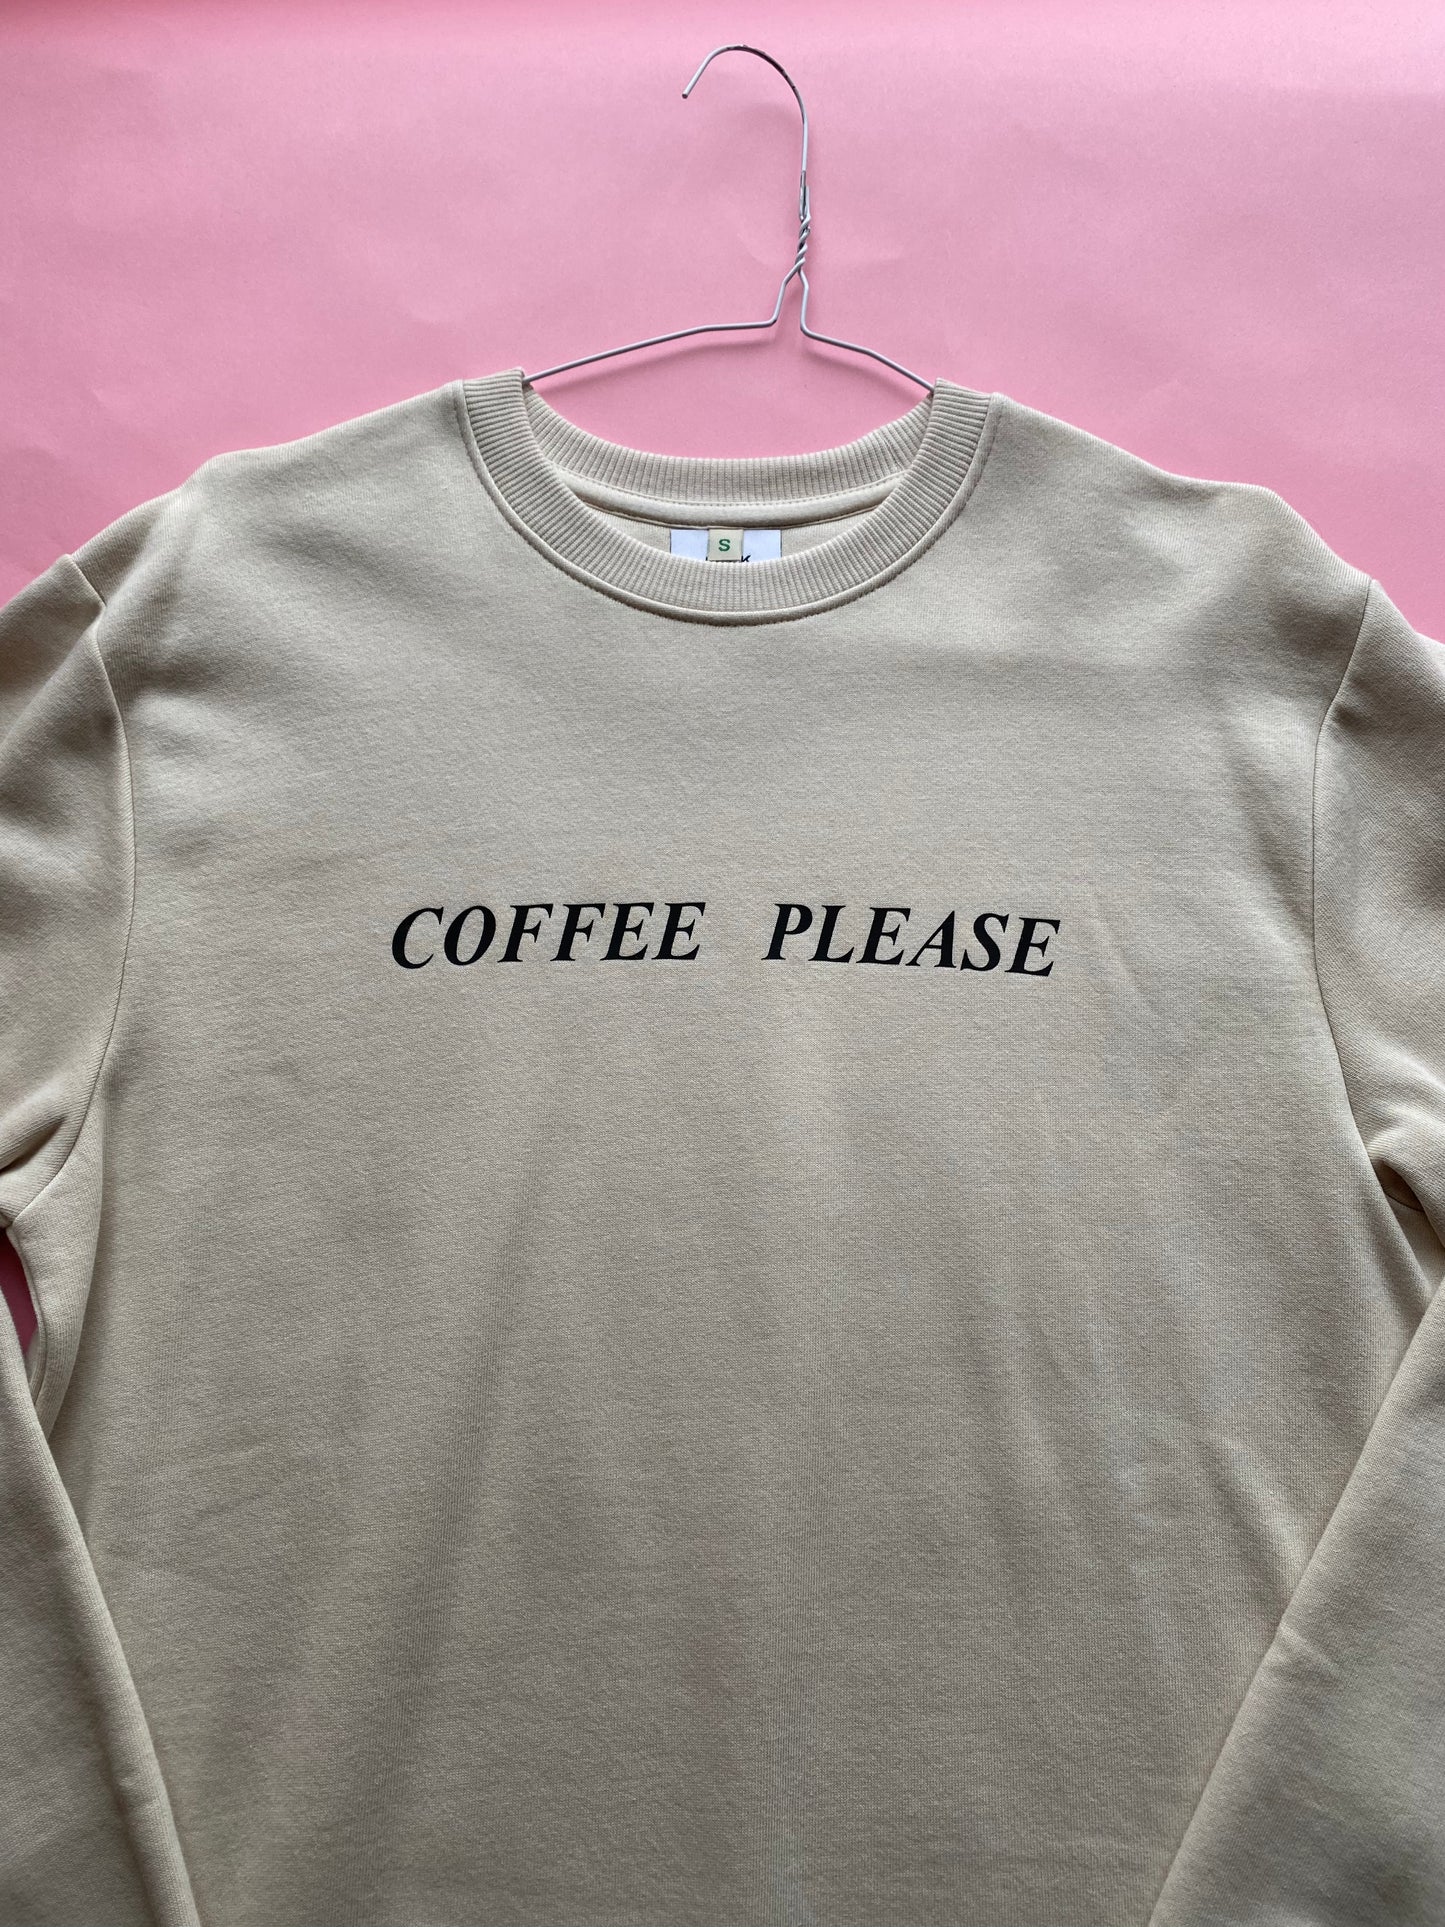 S - Coffee Please And a Biscuit Cream Organic Sweatshirt SALE